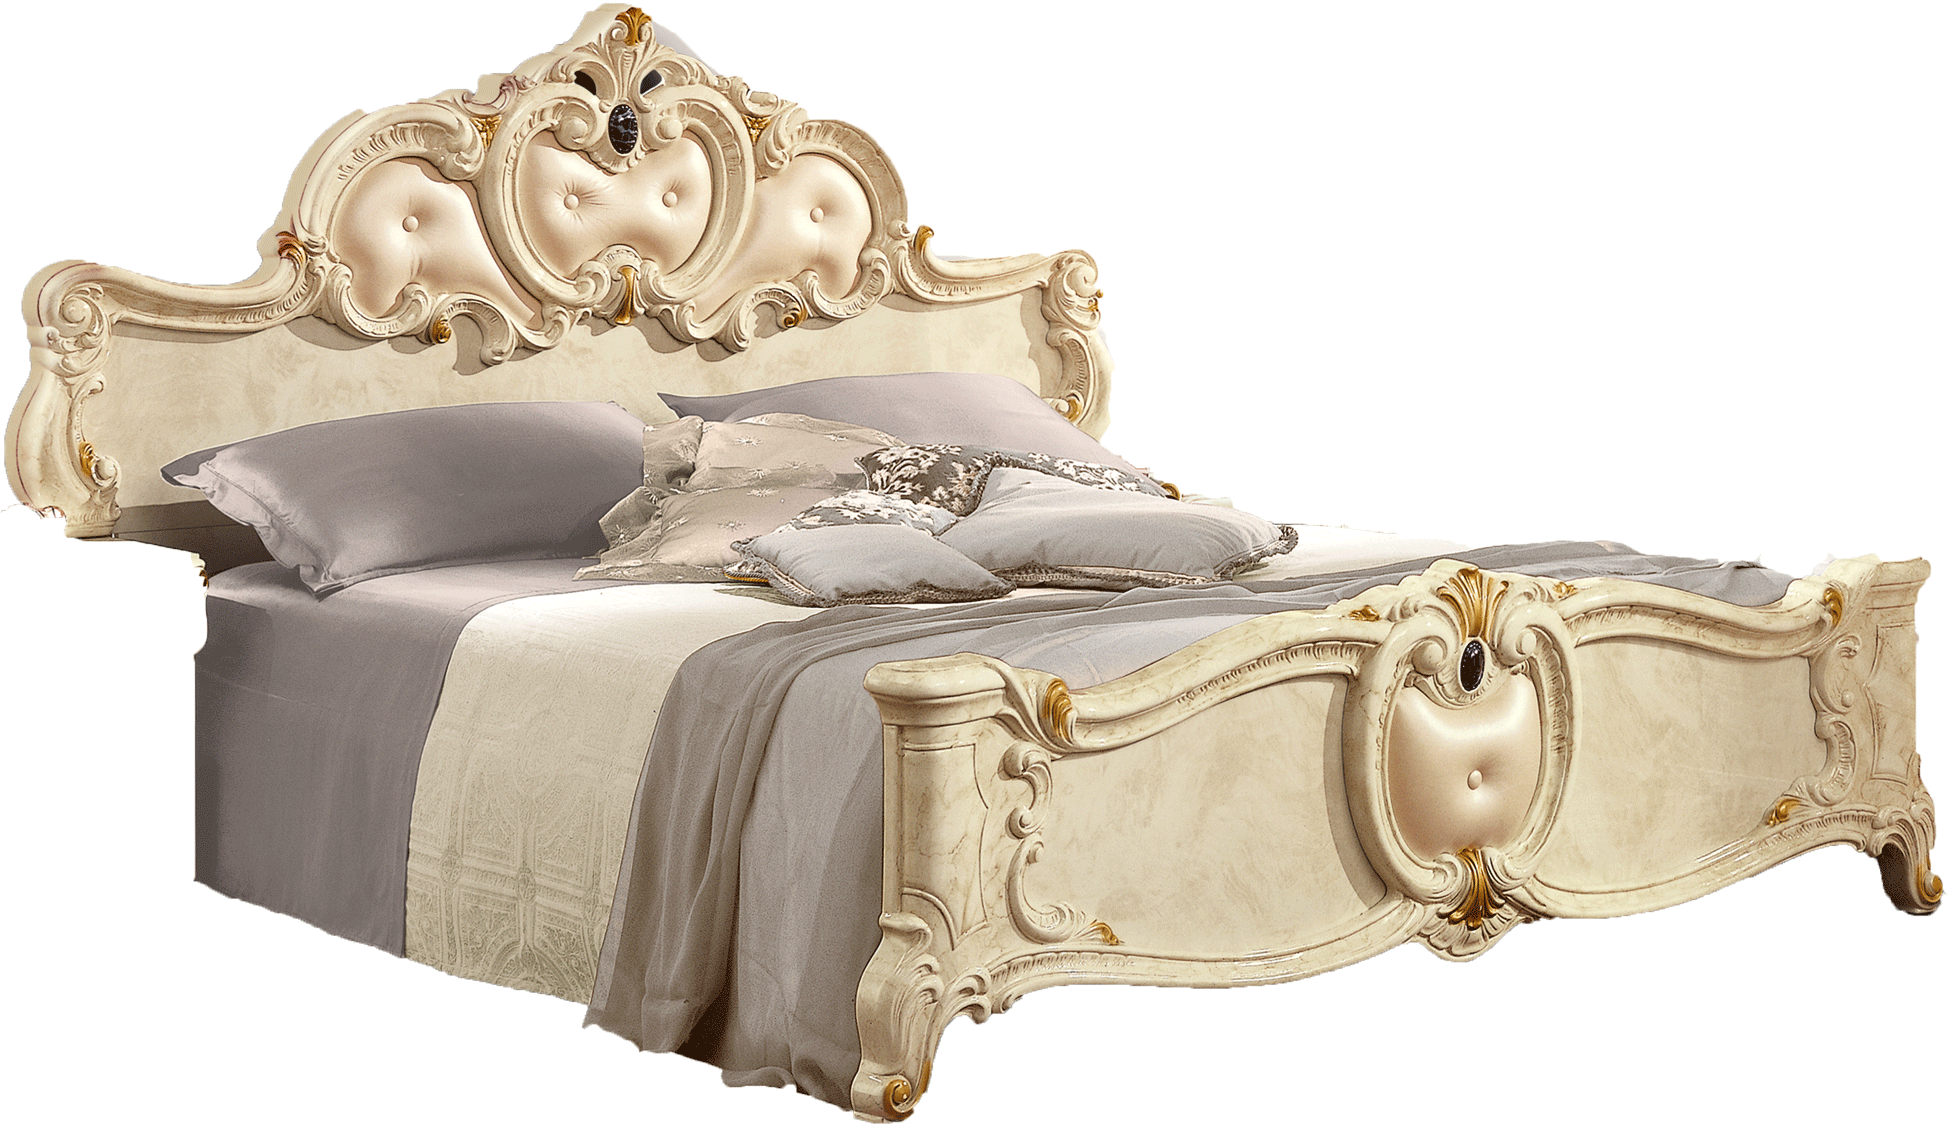 Brands Camel Classic Collection, Italy Barocco Bed Ivory, Camelgroup Italy